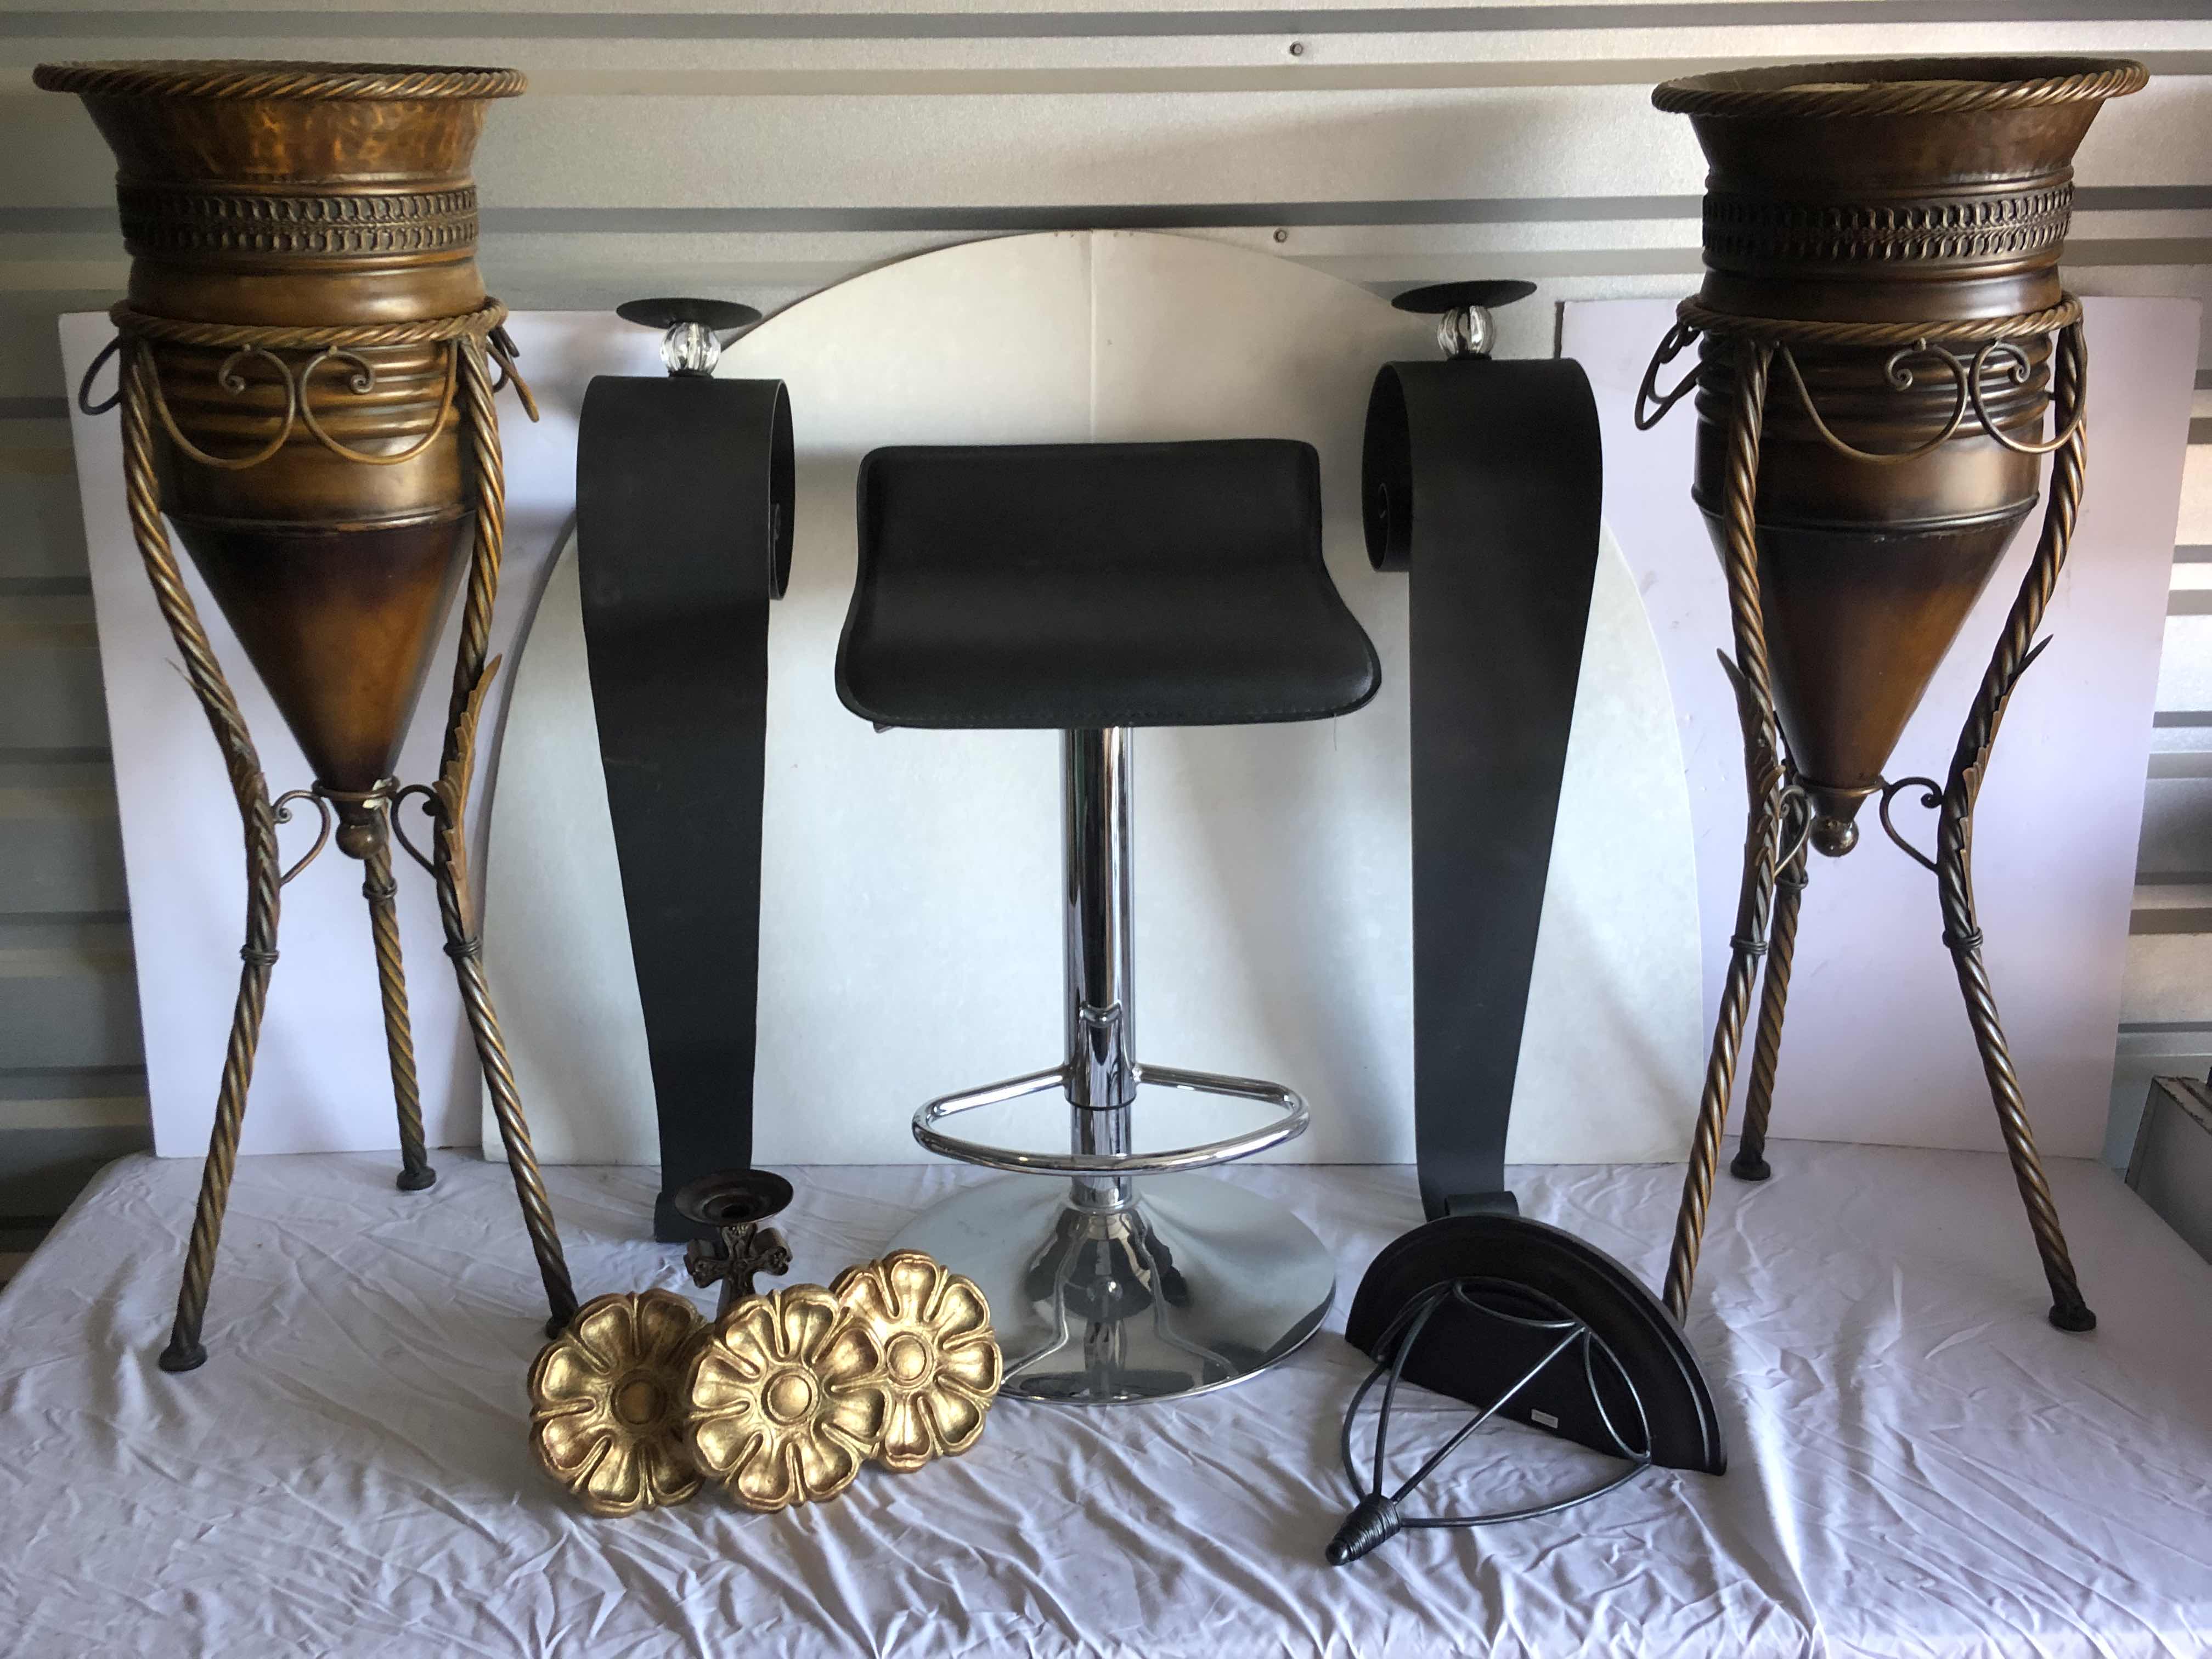 Photo 1 of 2-BLACK METAL HANGING WALL CANDLE SCONCES, GOLD HOME DECOR, 2-COPPER TALL VASES, & ADJUSTABLE HEIGHT BAR STOOL